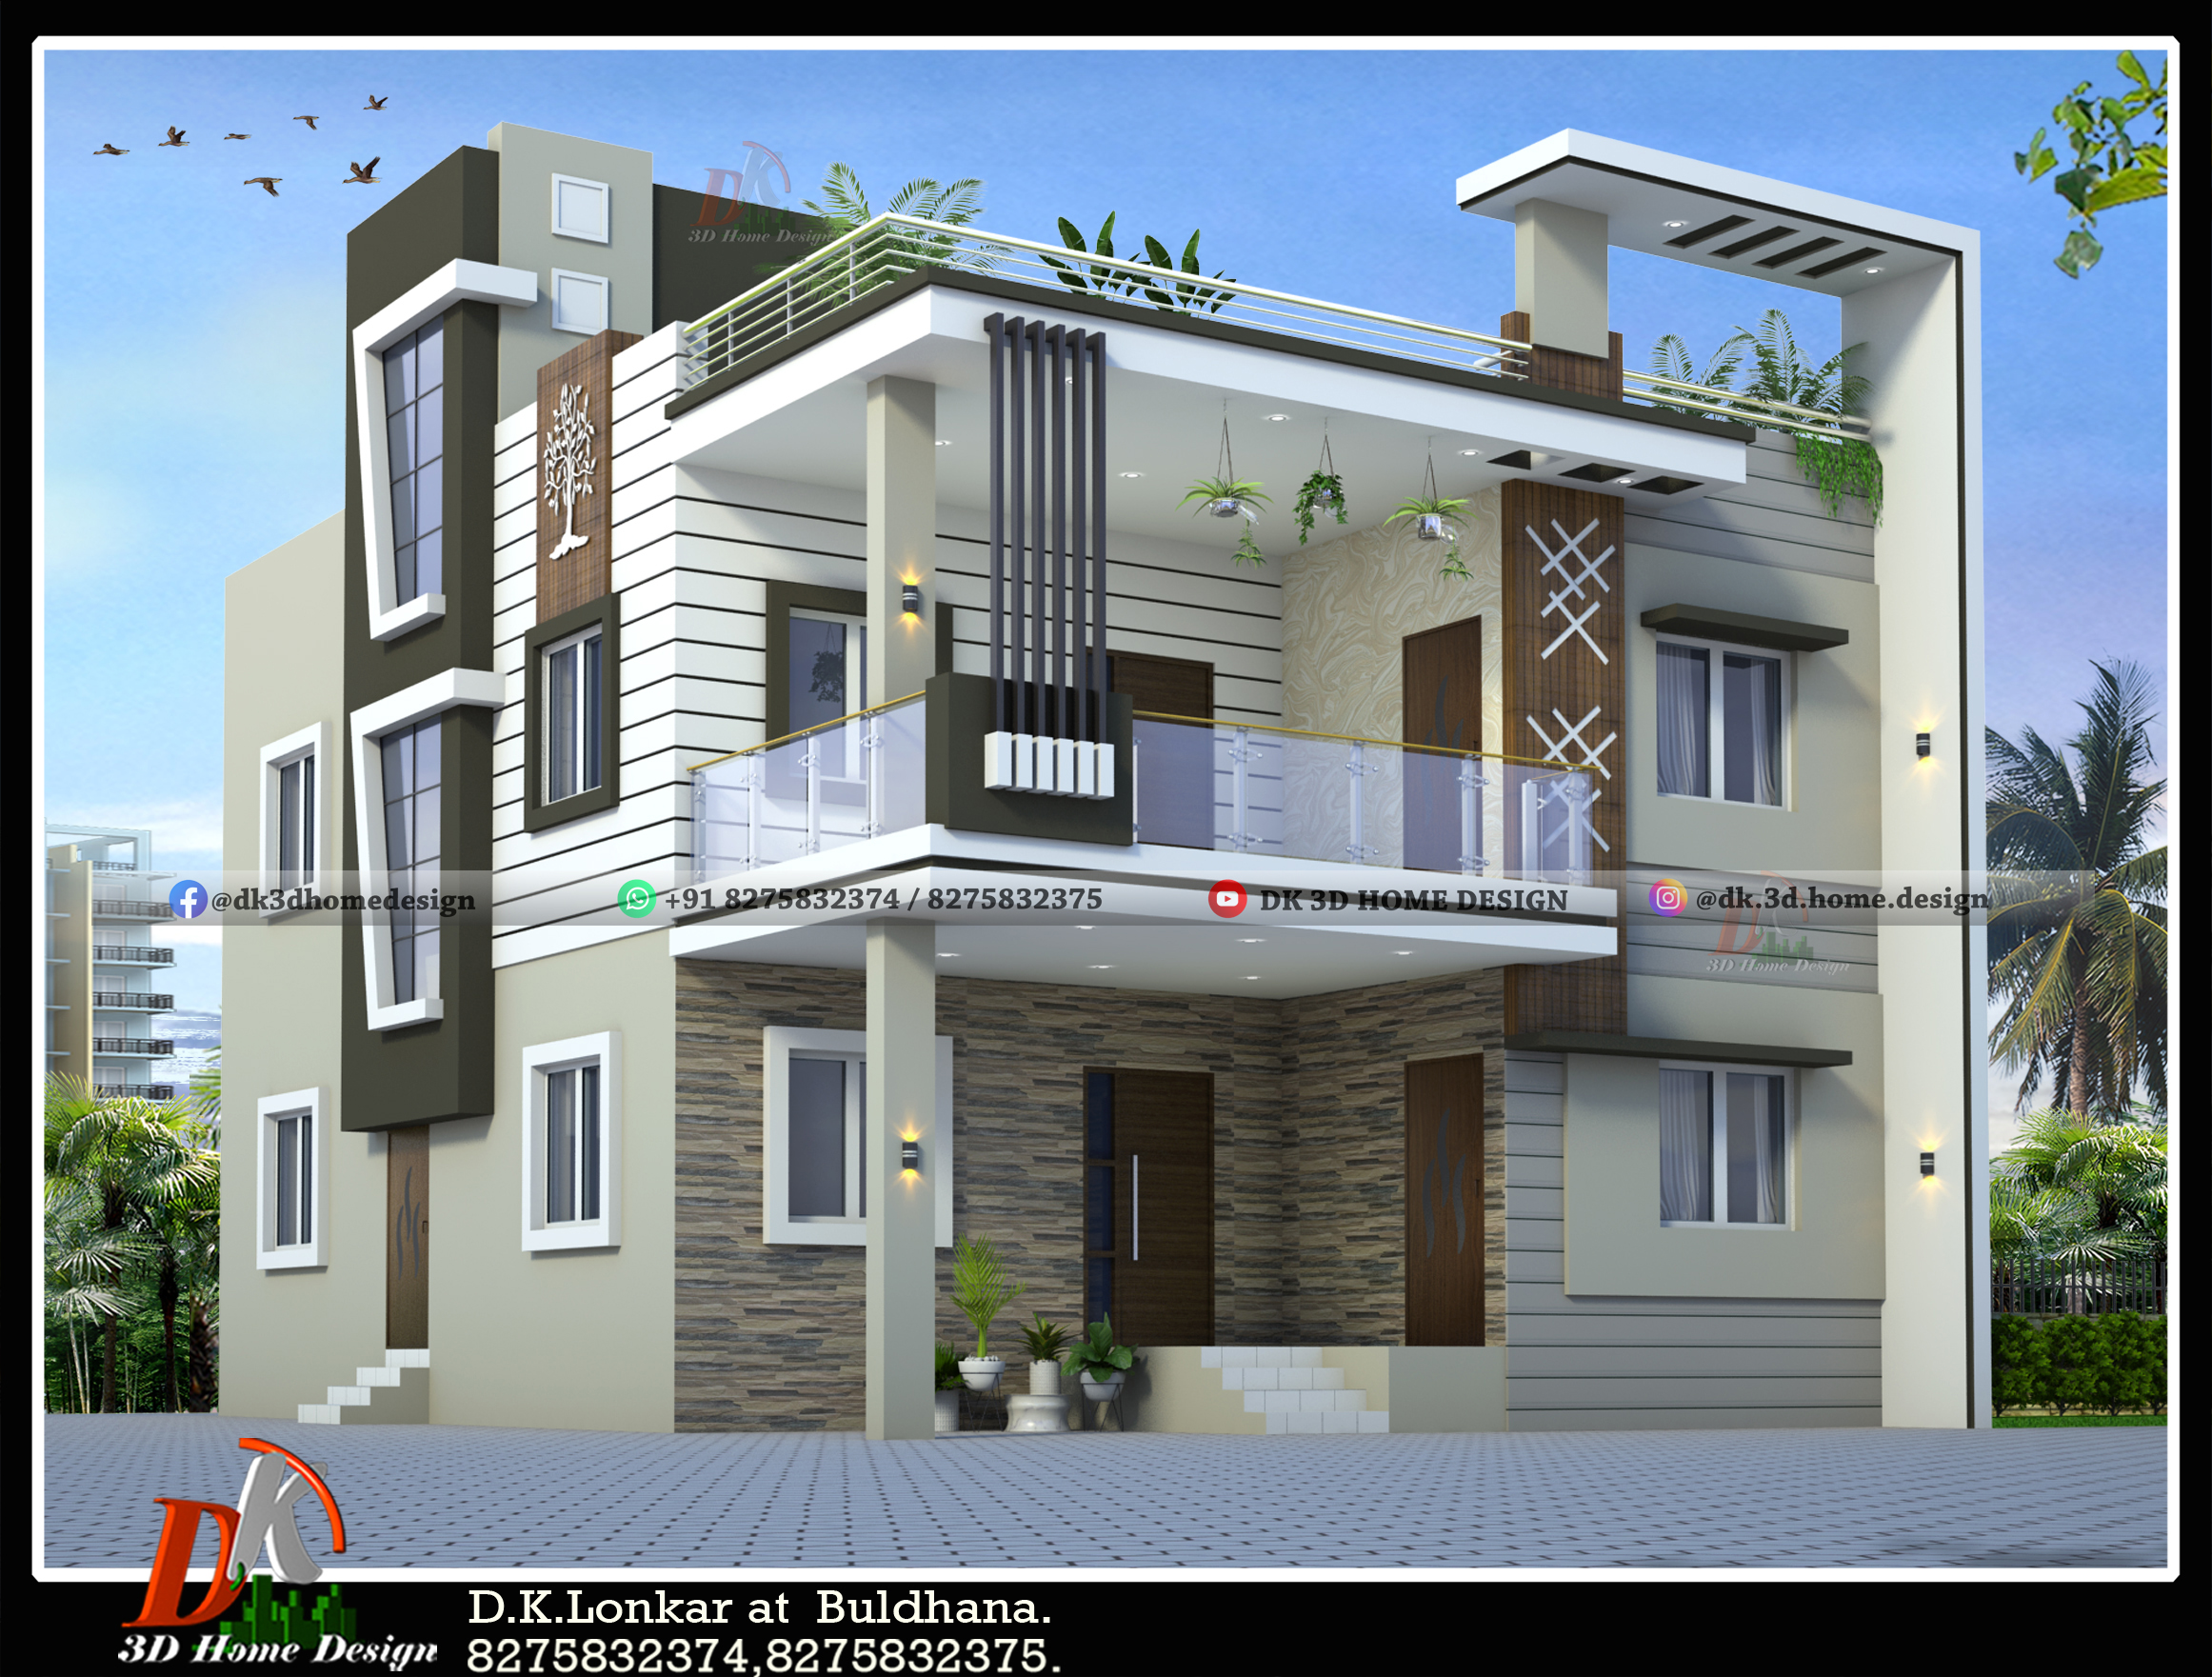 Modern two story bungalow front elevation design